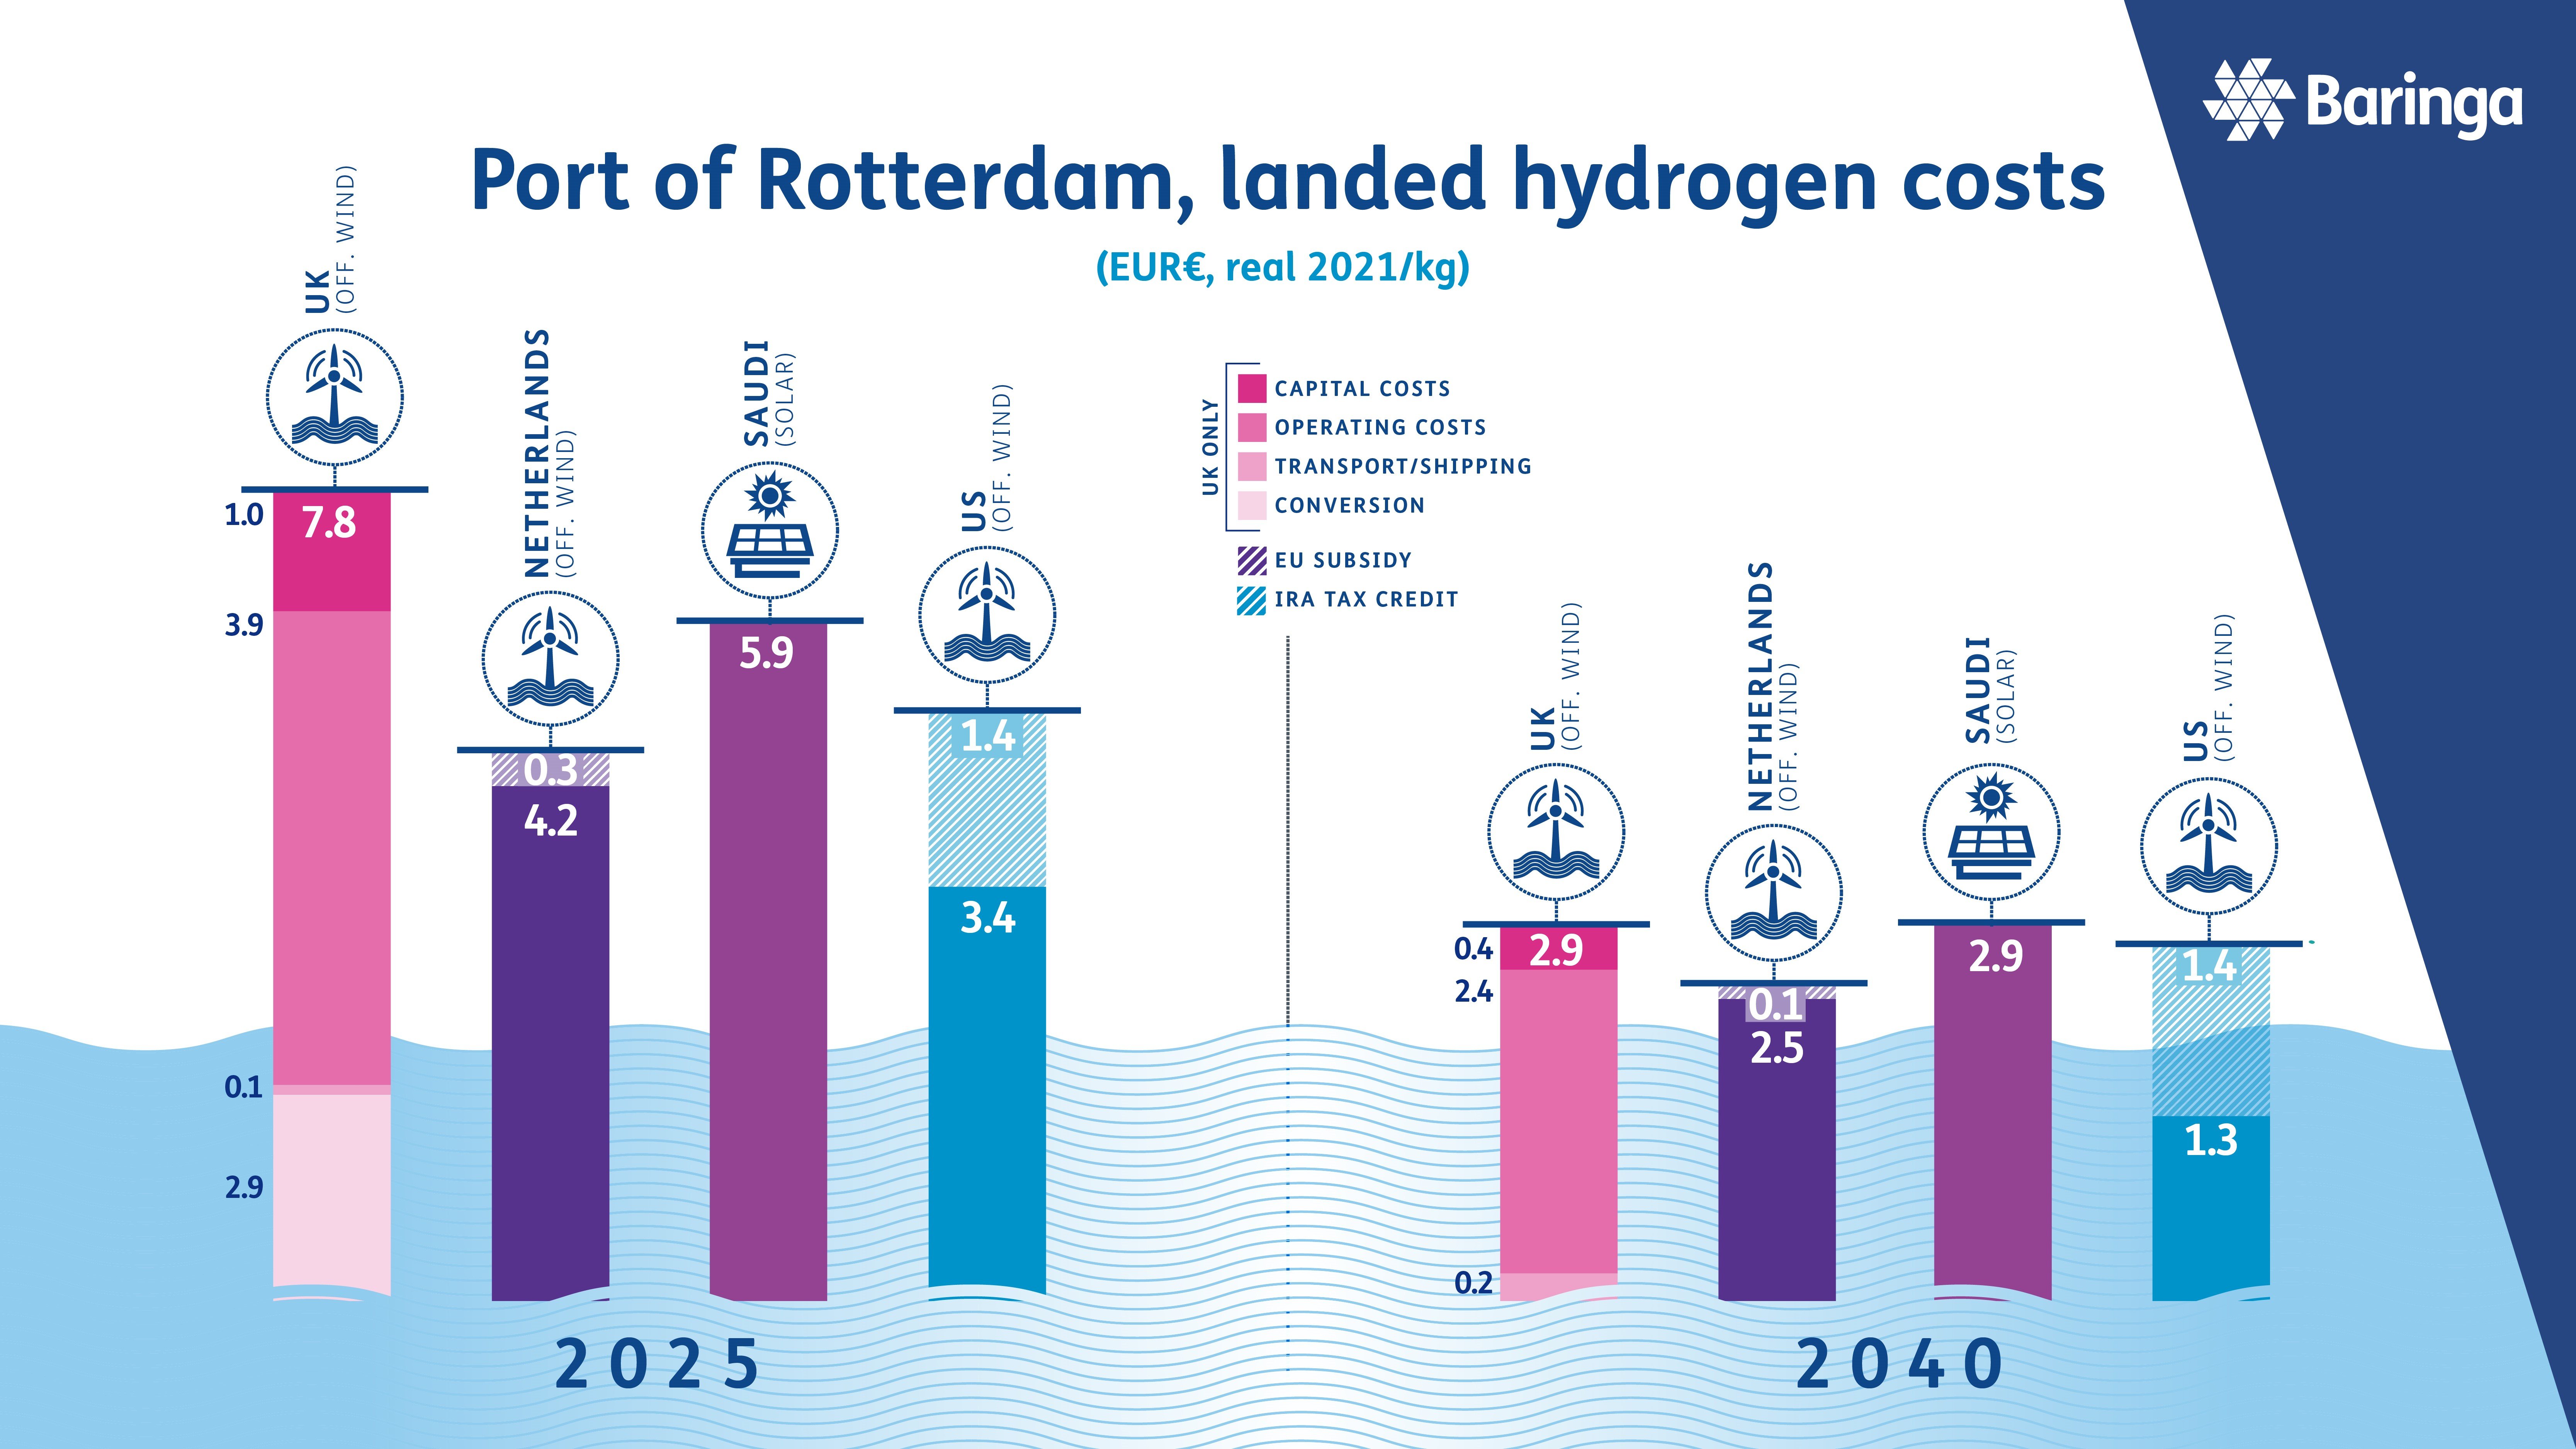 Infographic showing landed hydrogen costs in Rotterdam